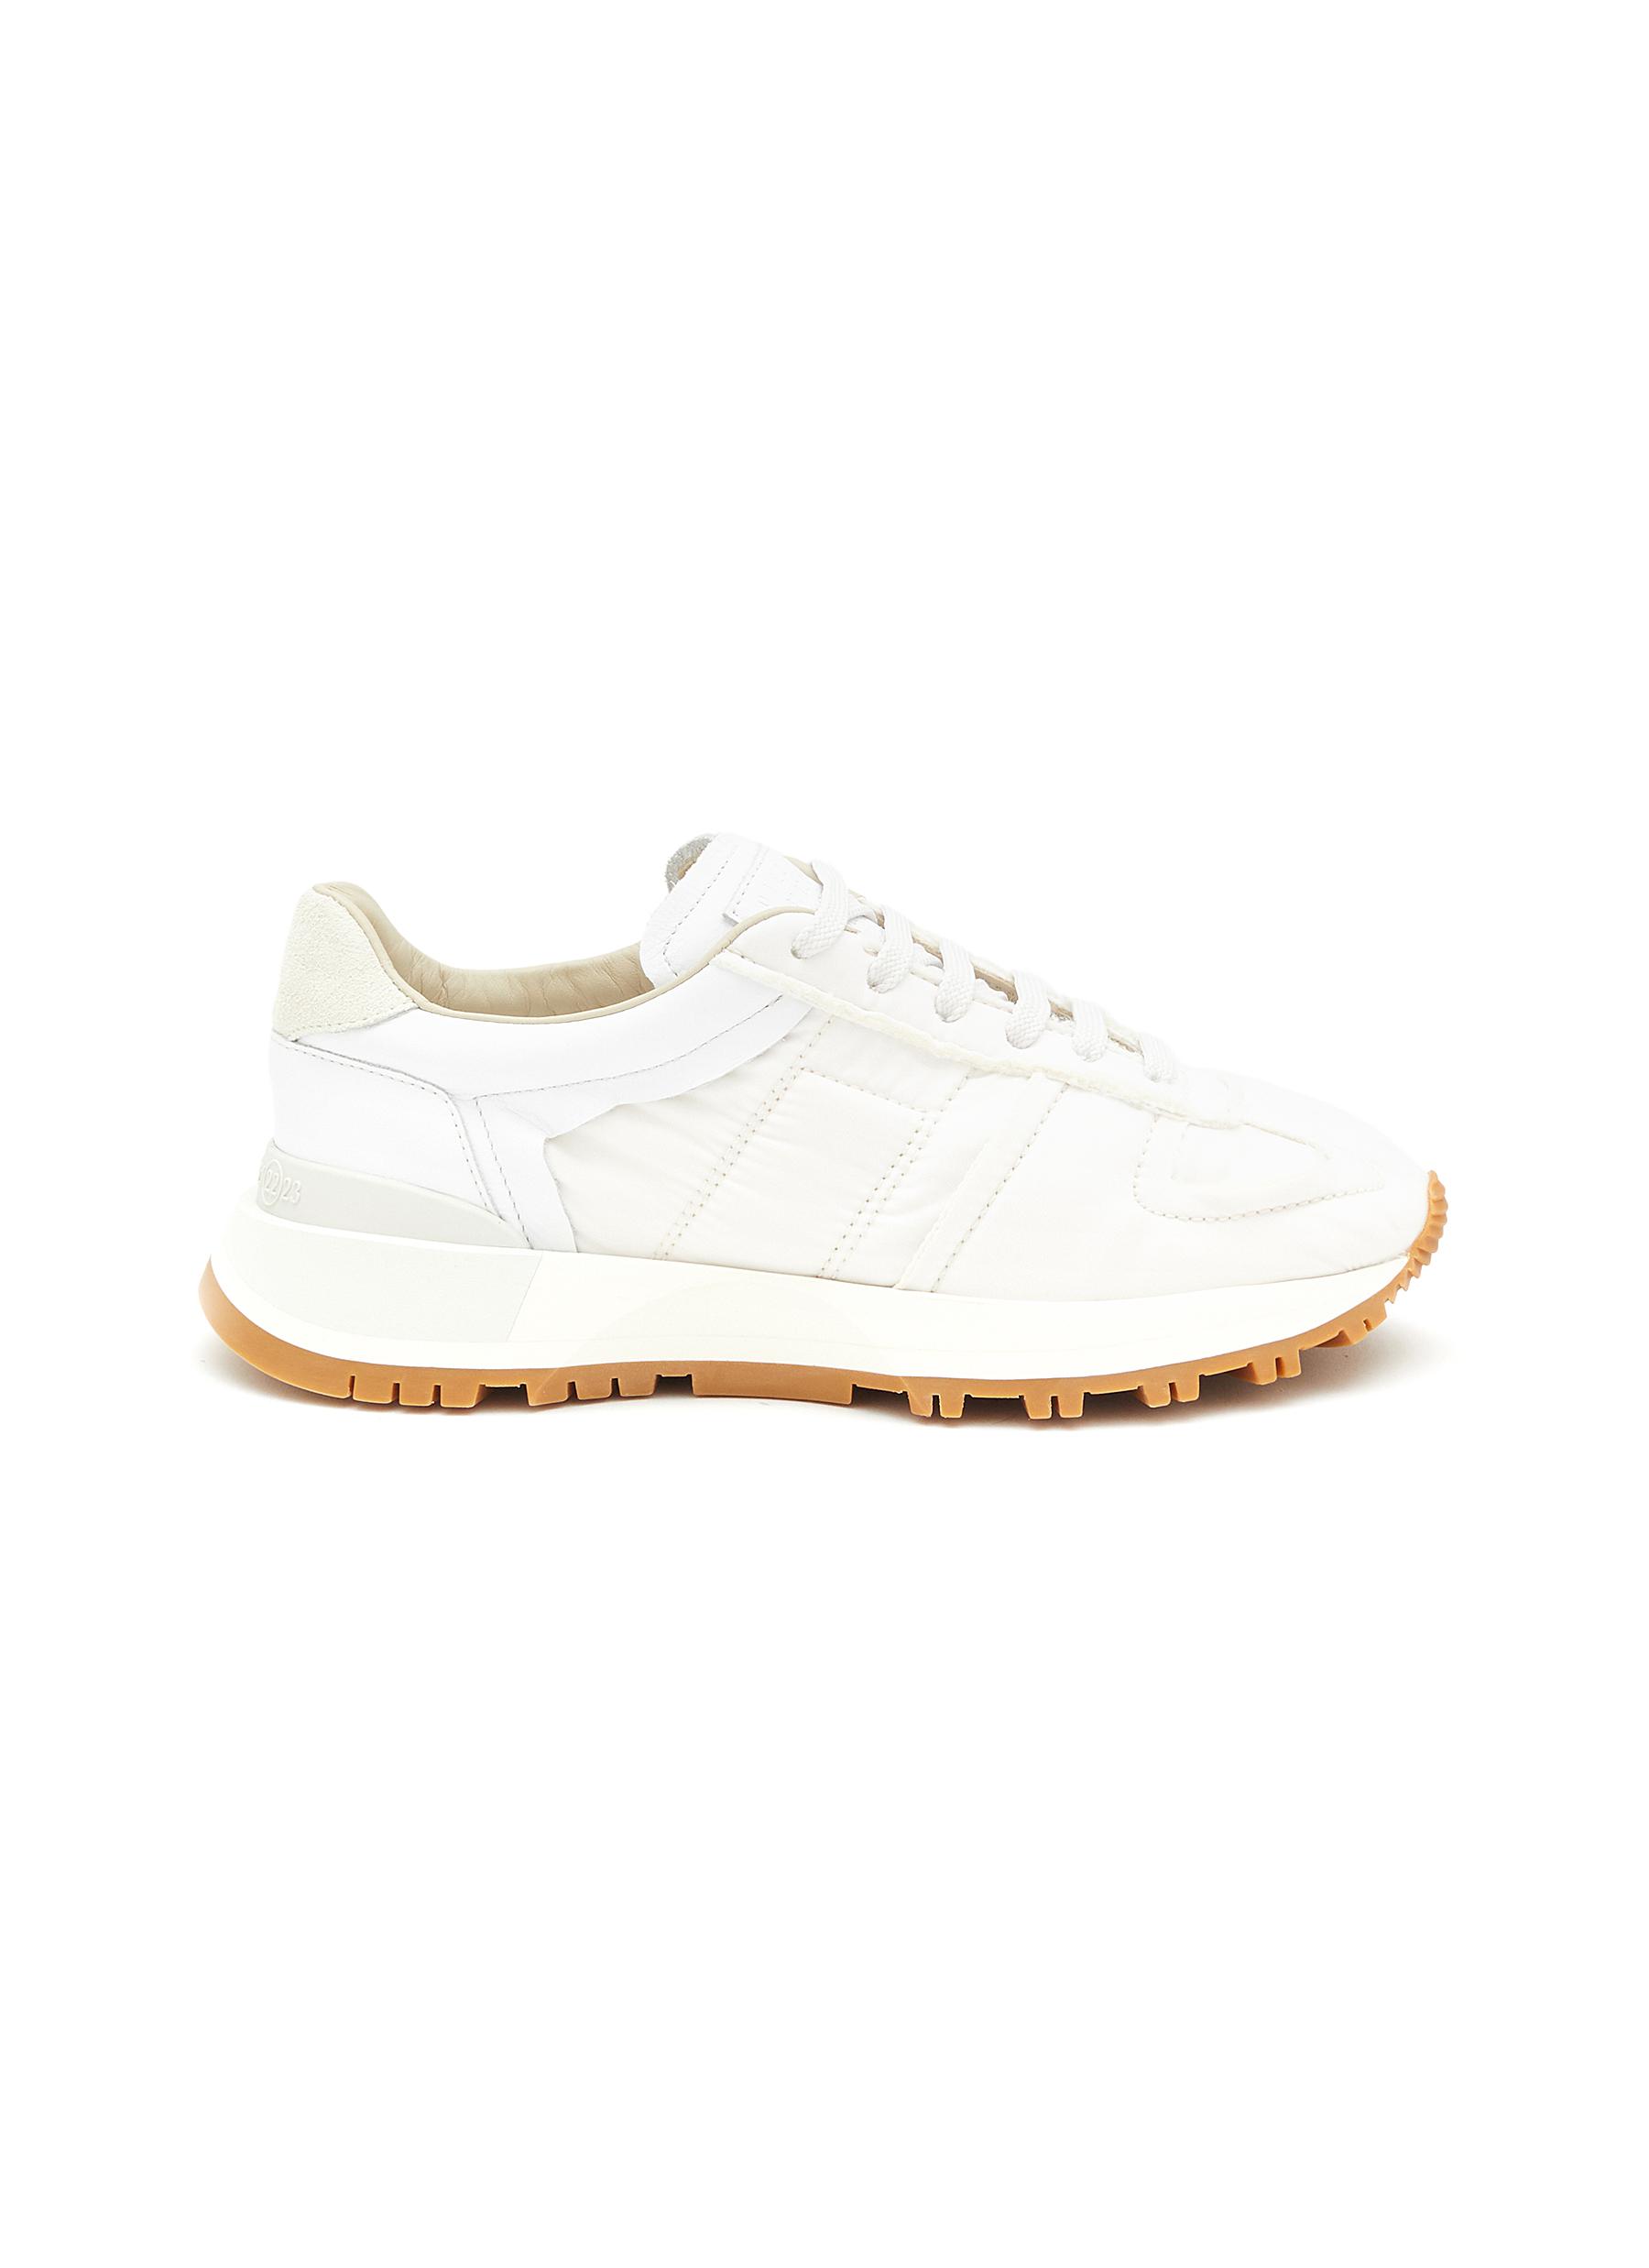 â€˜50/50’ Nylon Leather Low Top Sneakers